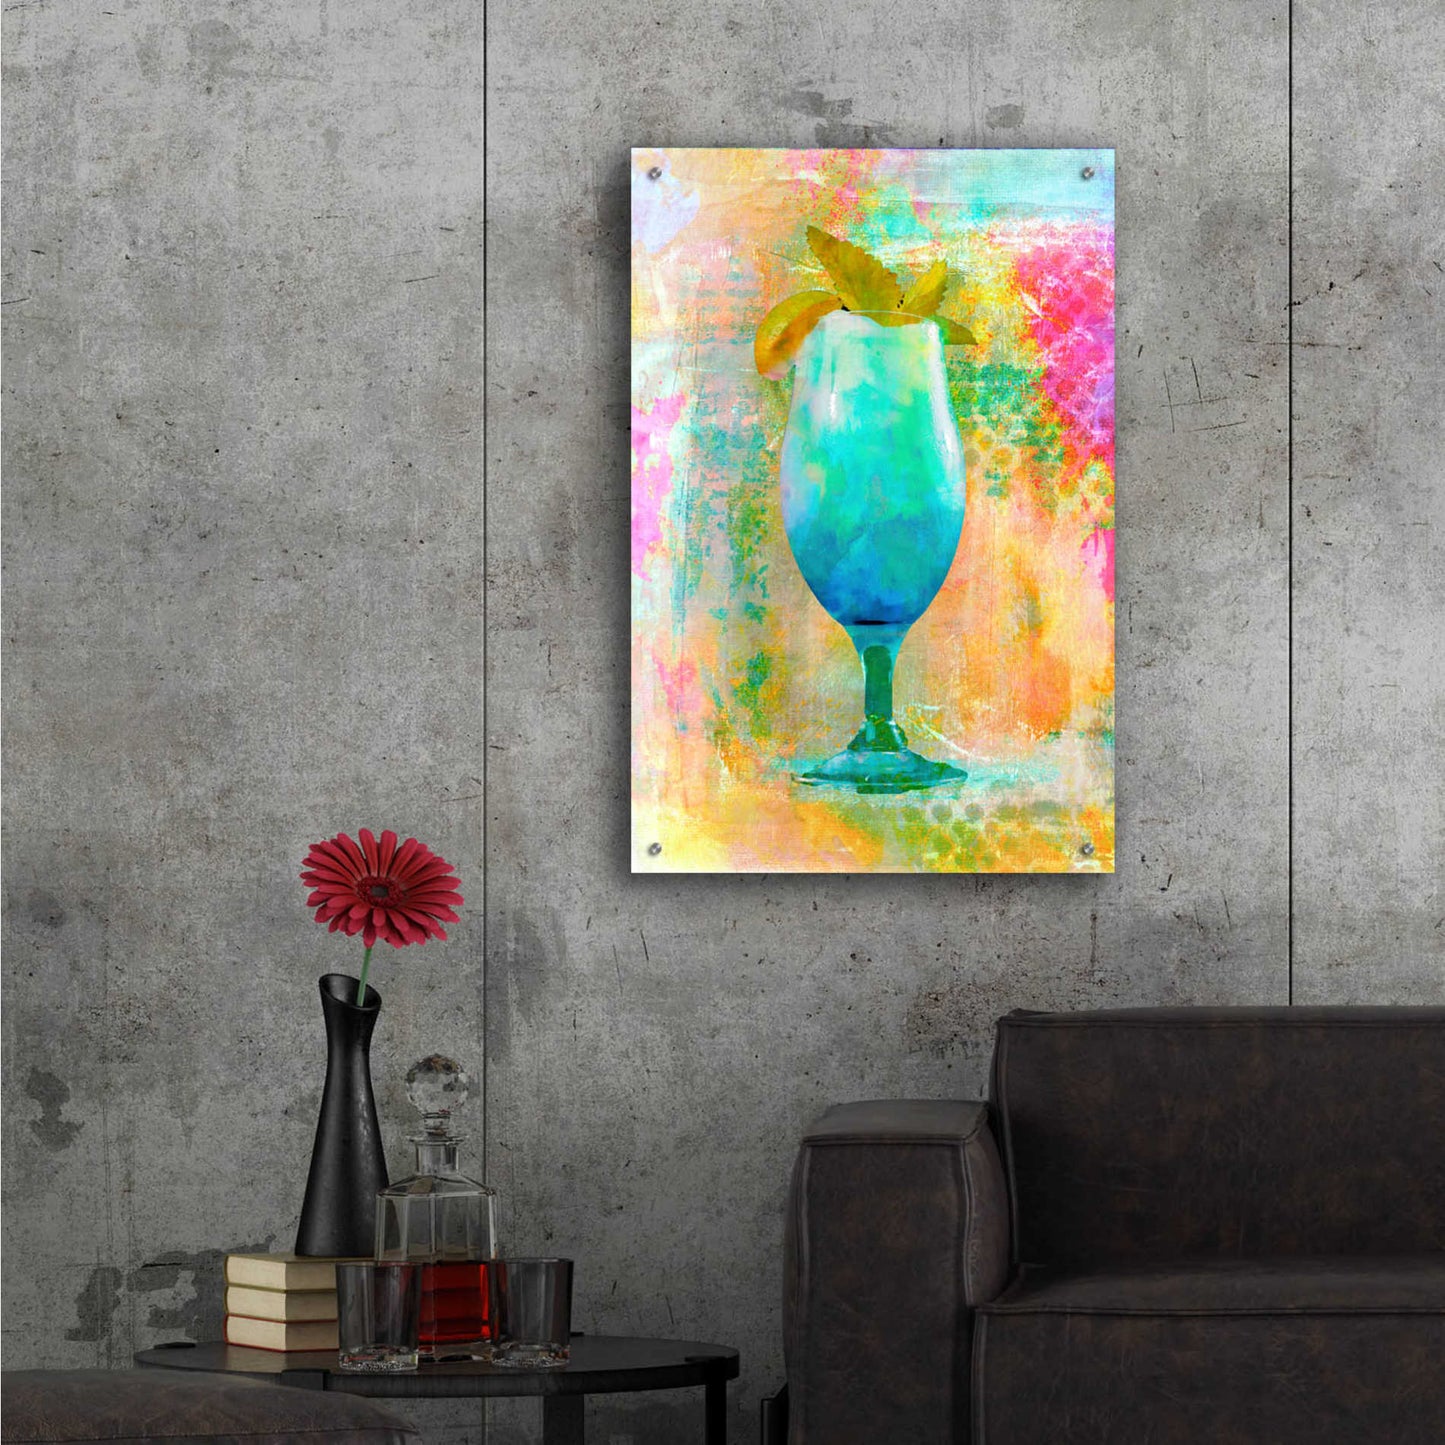 Epic Art 'Cocktail Night' by Andrea Haase Acrylic Glass Wall Art,24x36